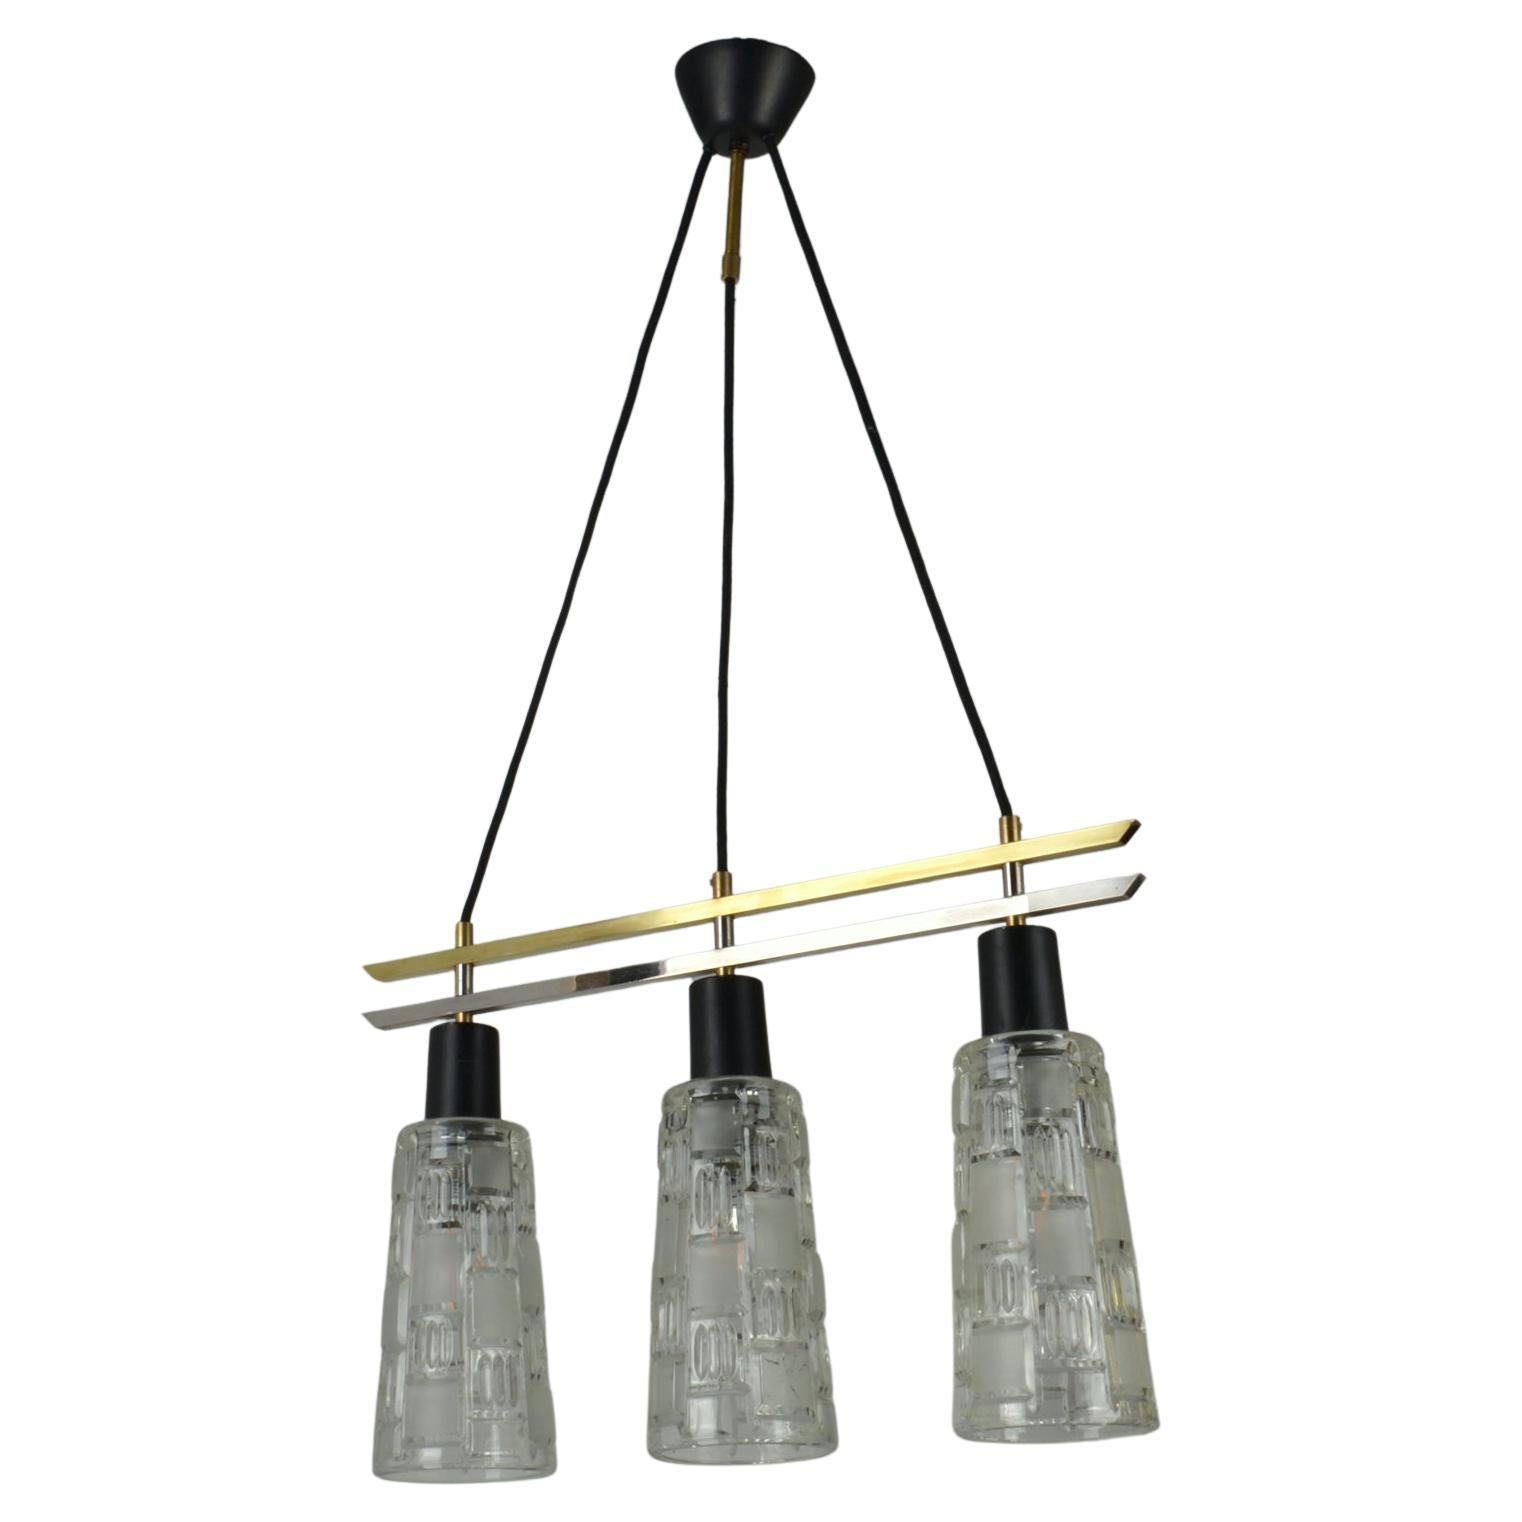 Triple light glass 1960s chandelier has a frame of brass, chrome and black metal that brings the shades together. The relief shades are partly etched mat to diffuse the light. 
The lamp will look great over a dining table.

Dimensions shades;